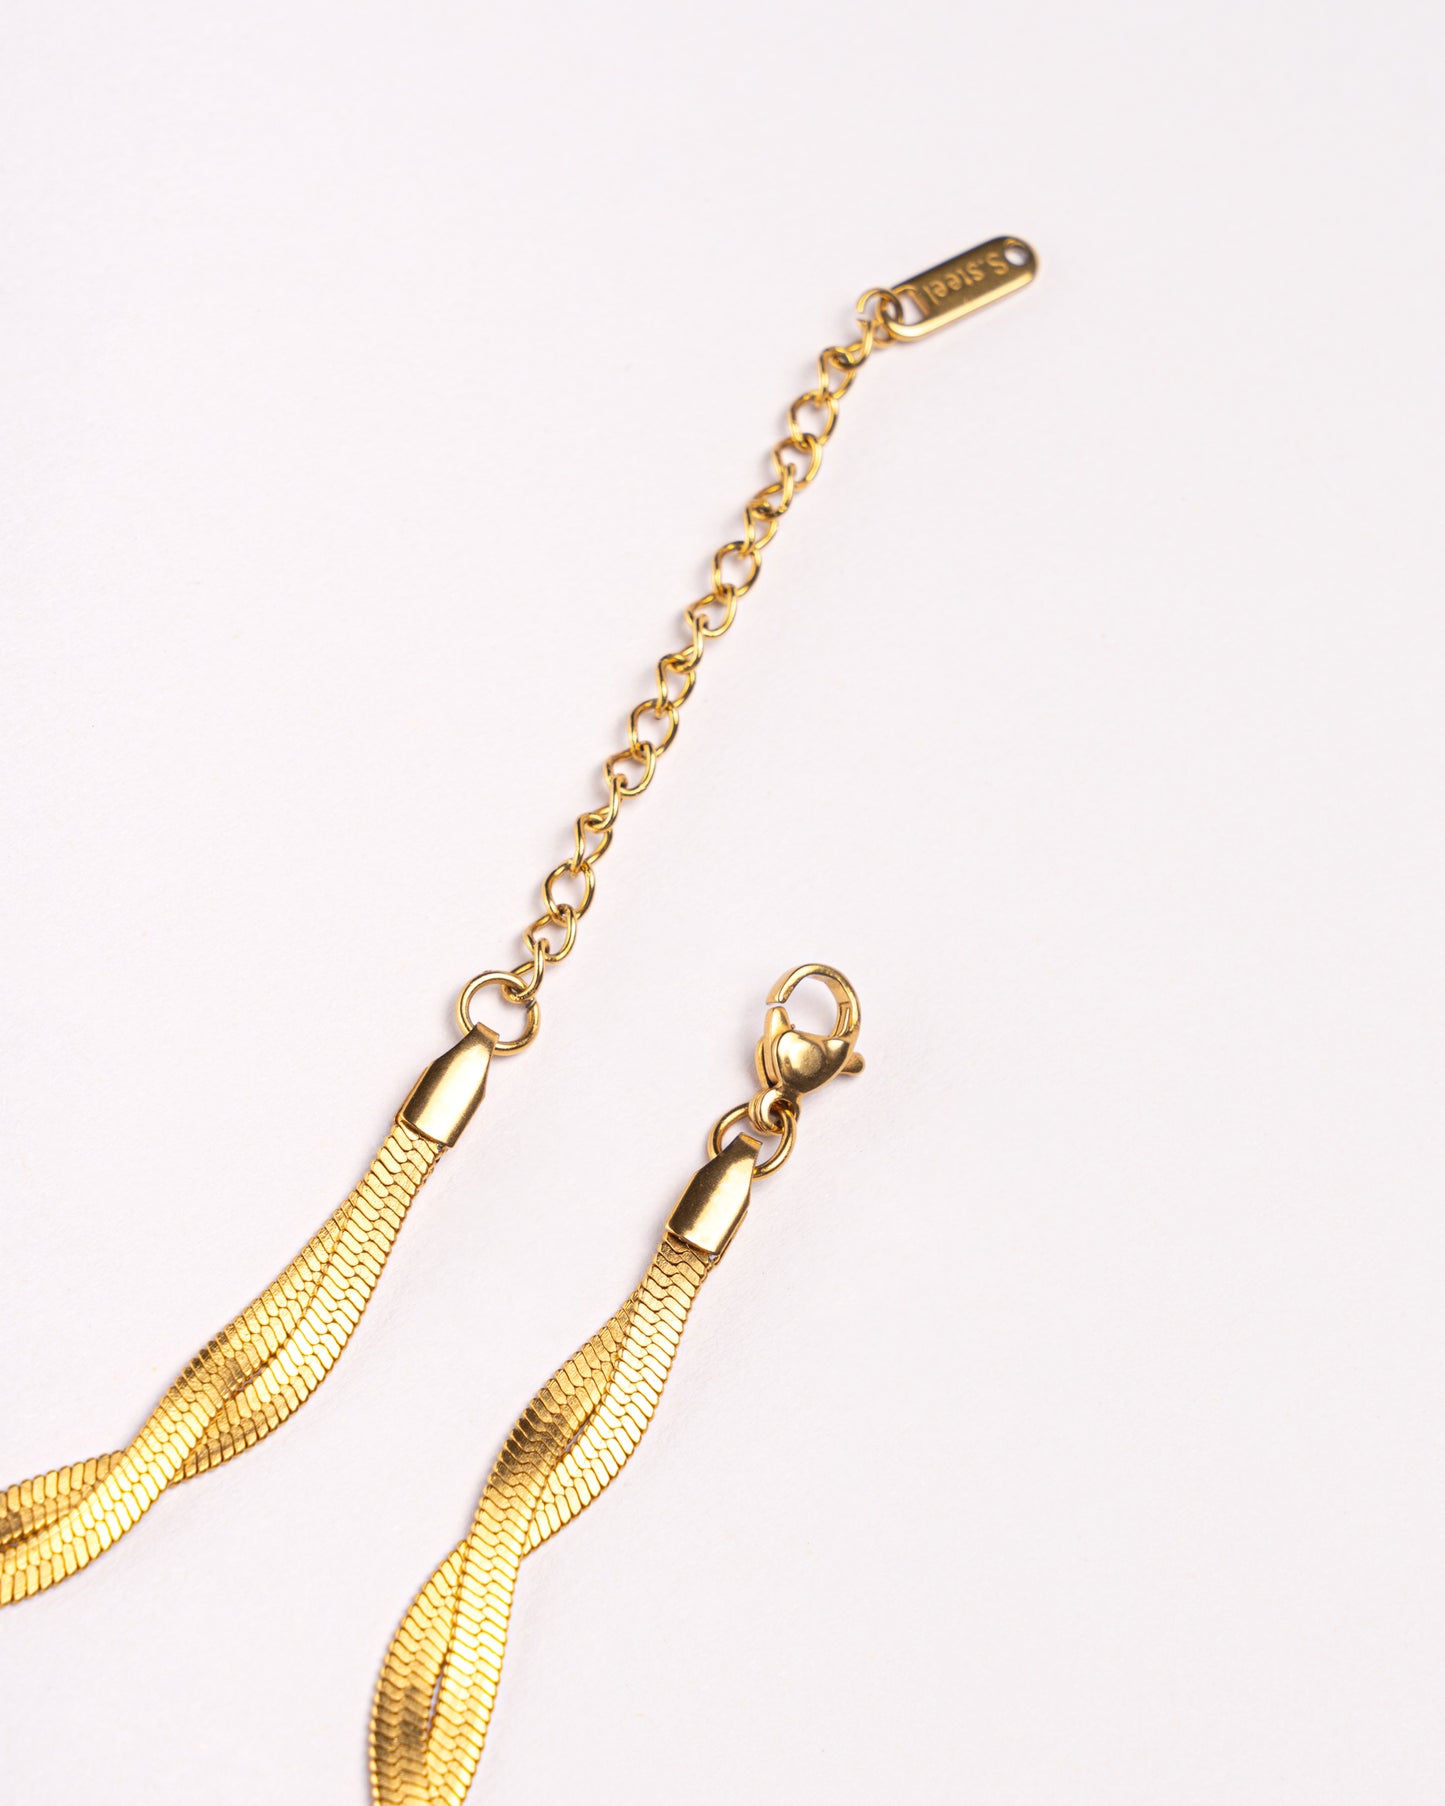 GOLDEN NECKLACE DUO - CUORE